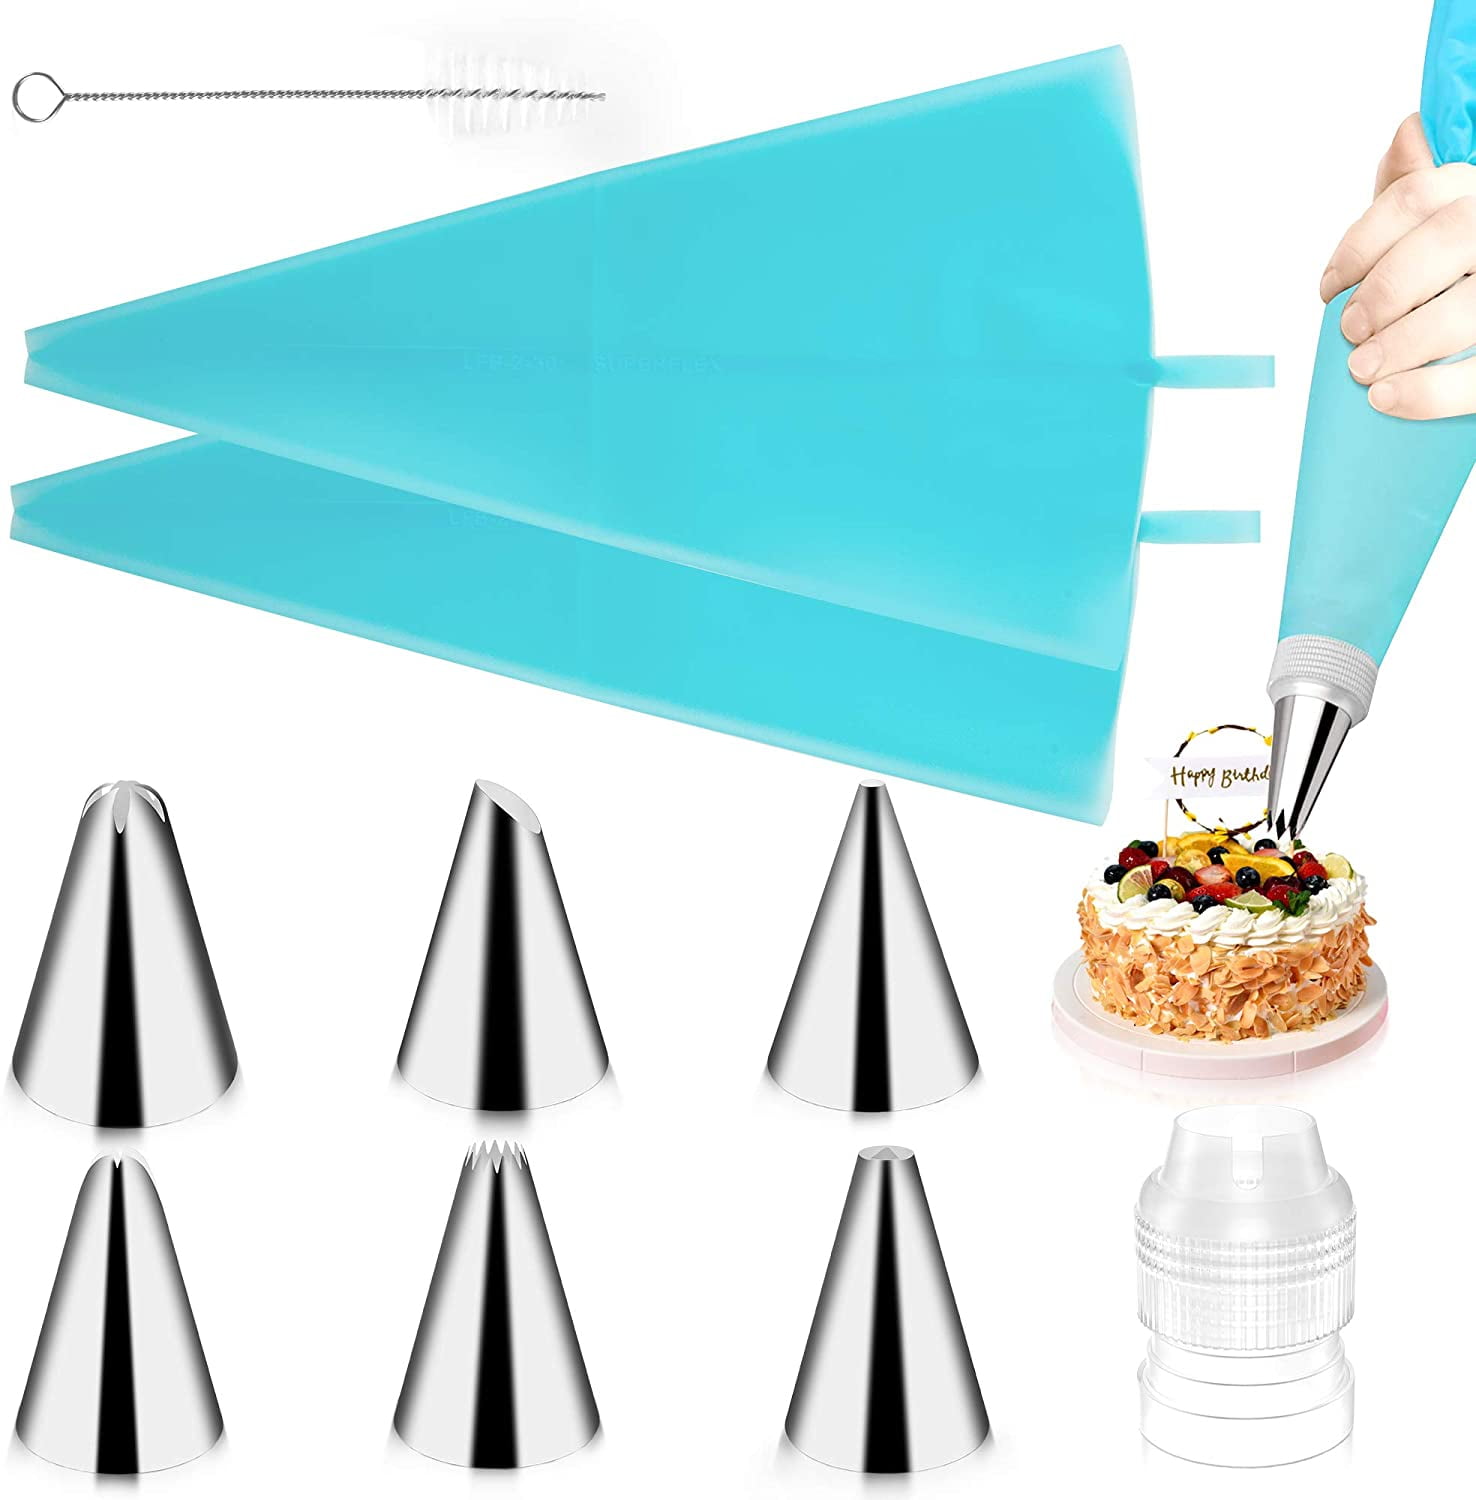 Cake Piping Nozzles 48 Pieces/Stainless Steel Emergency Nozzle Set,Cake Decorating Nozzle Set for Cake Baking Tools,Desserts 